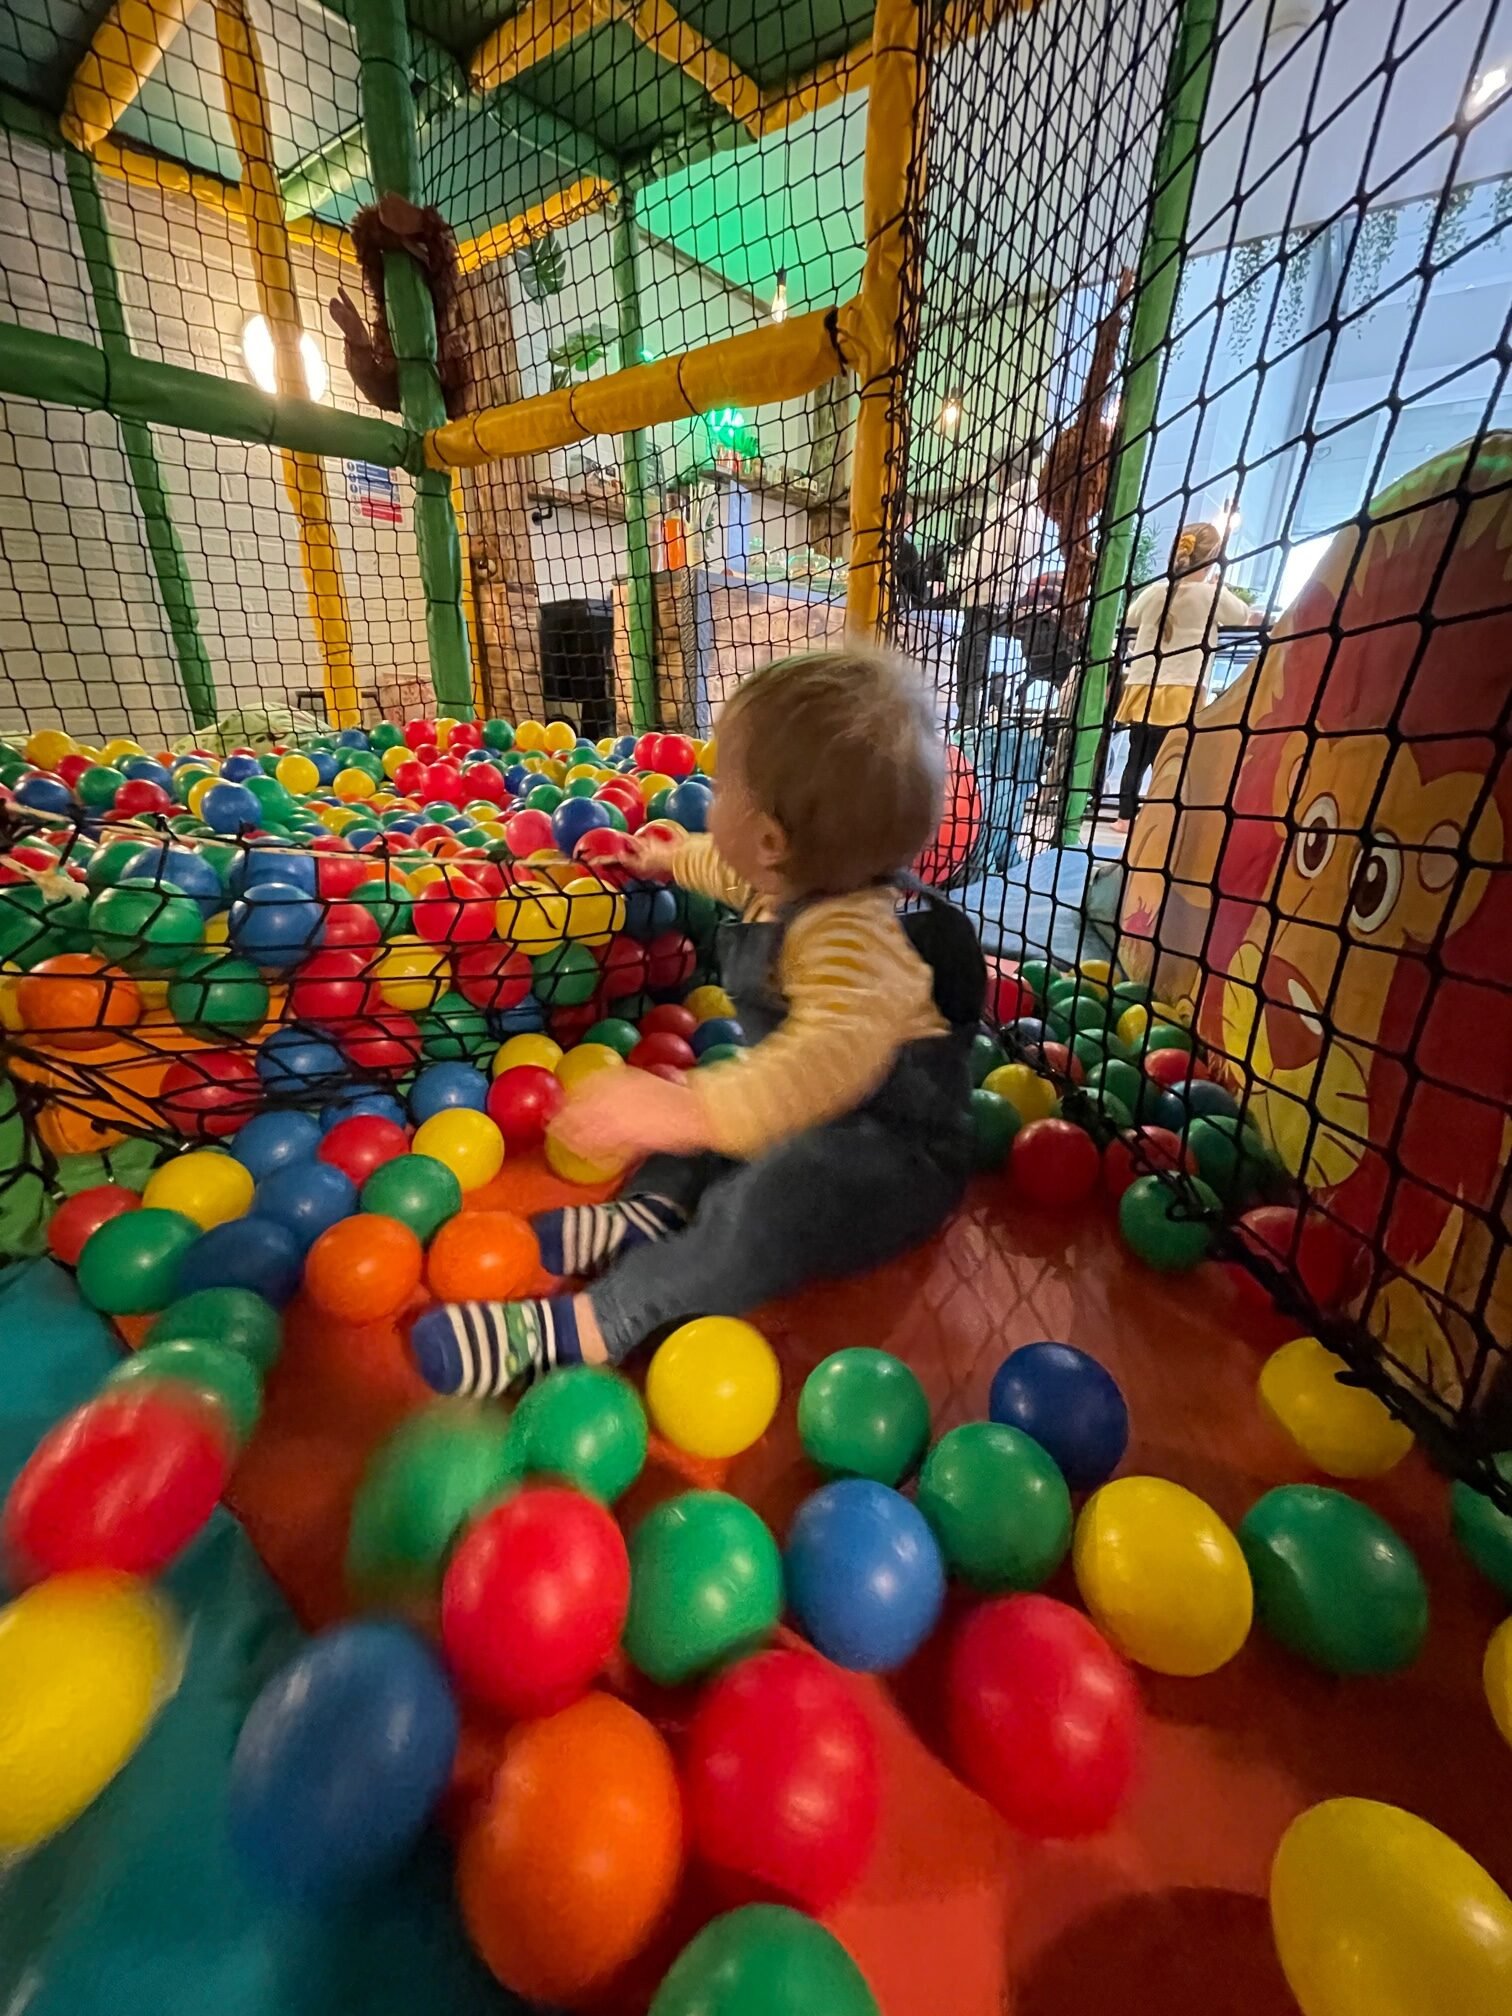 Cubs softplay Ilminster somerset